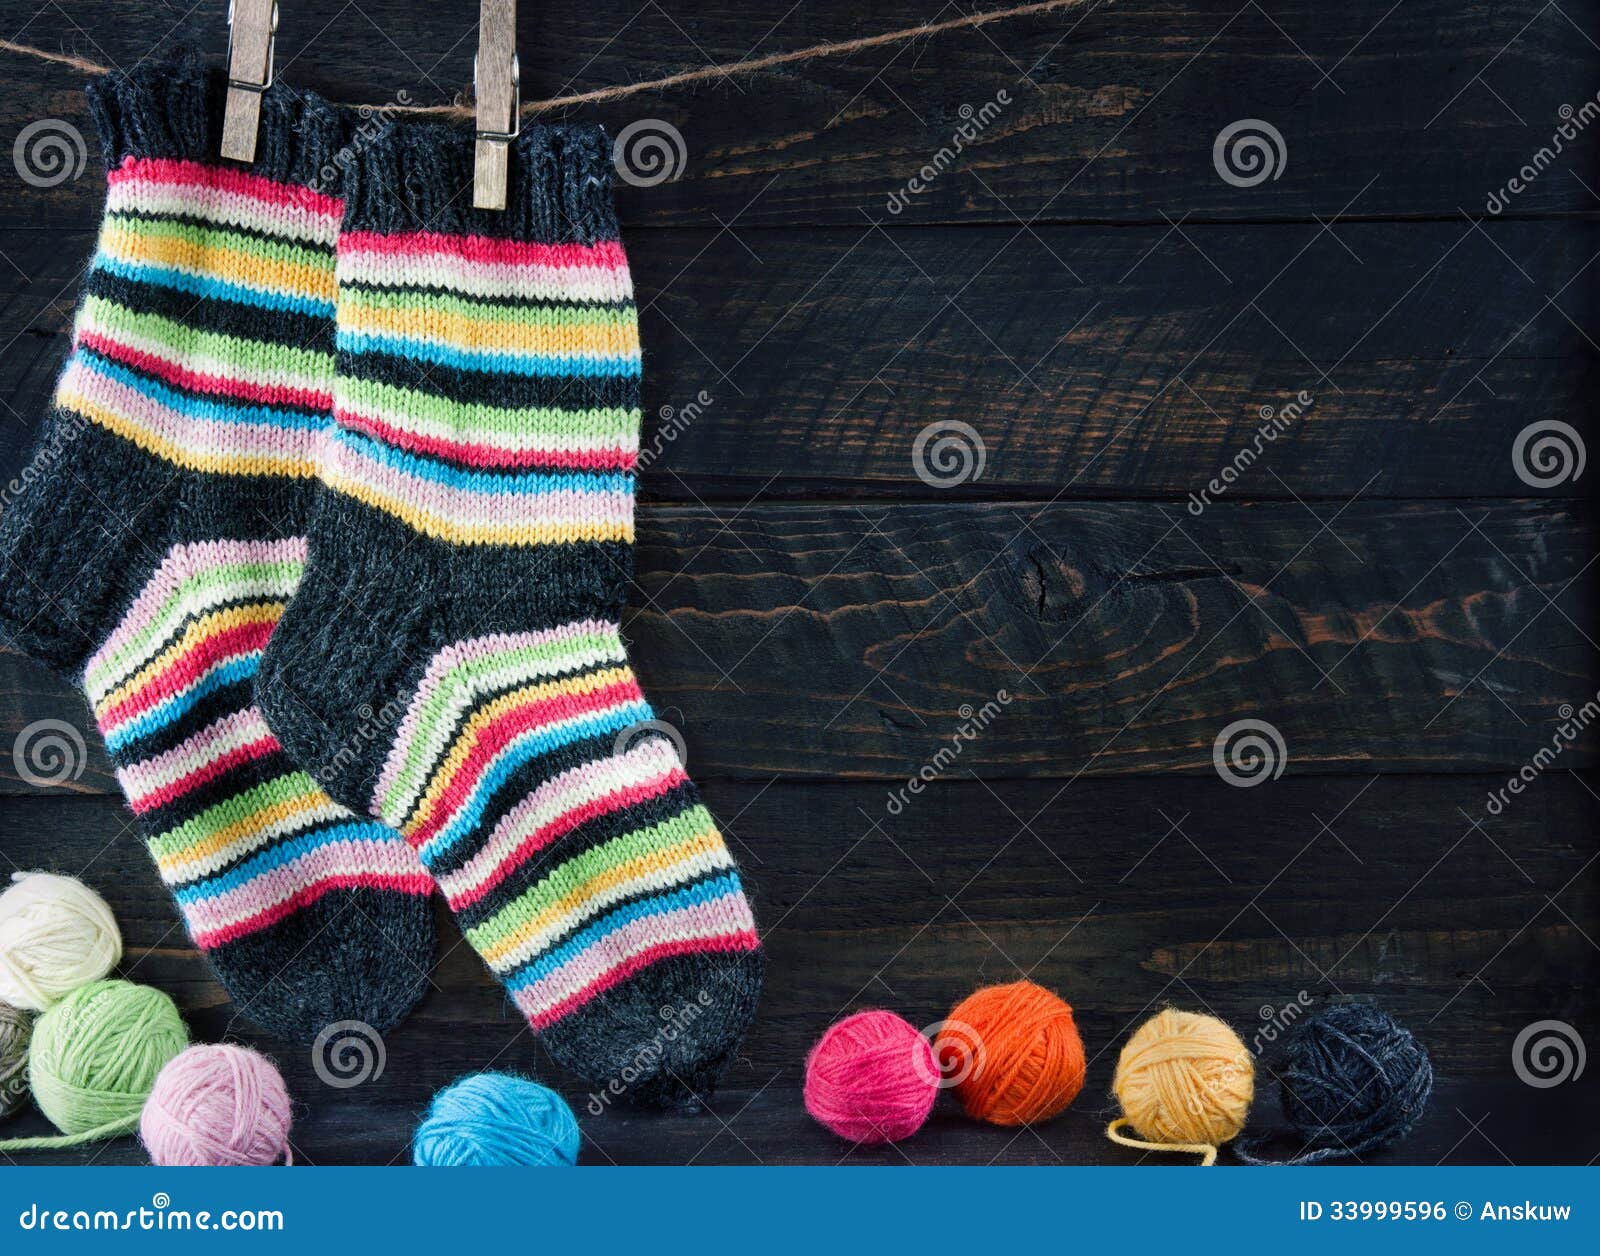 Pair of Colorful Striped Woolen Socks Stock Photo - Image of vintage ...